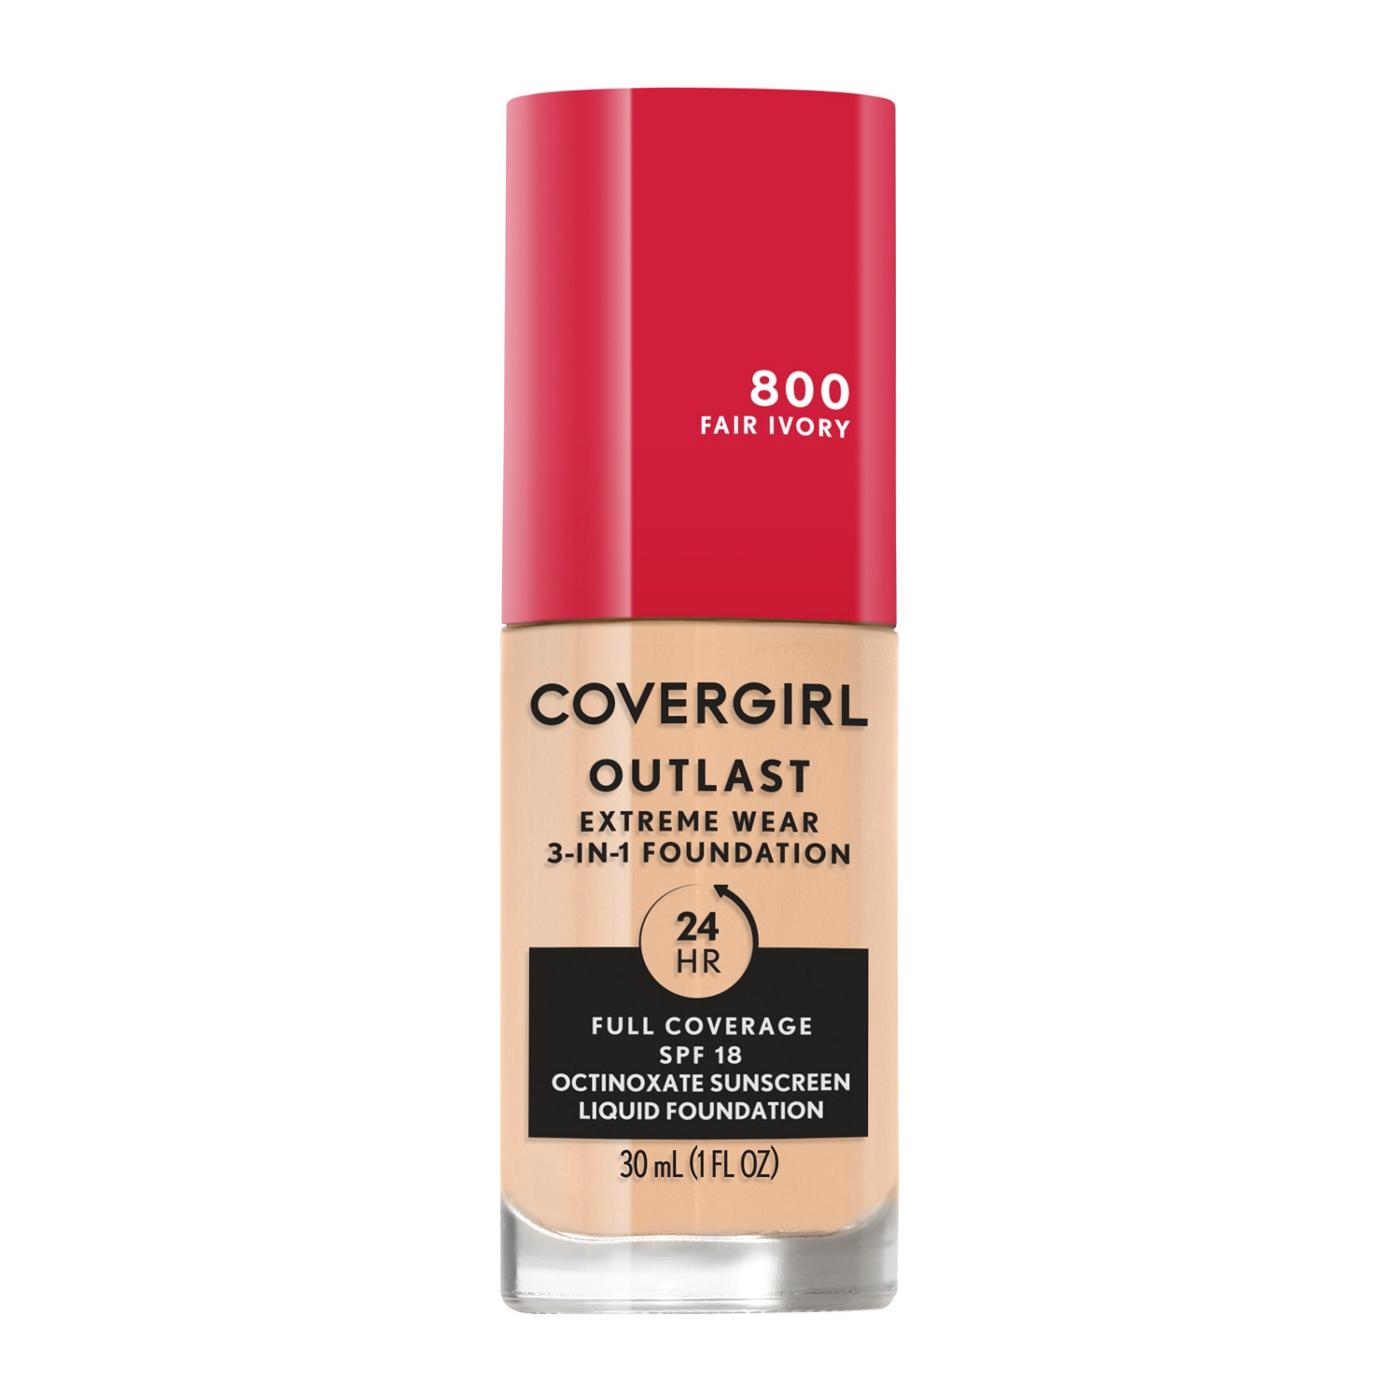 Covergirl Outlast Extreme Wear Liquid Foundation 800 Fair Ivory; image 1 of 11